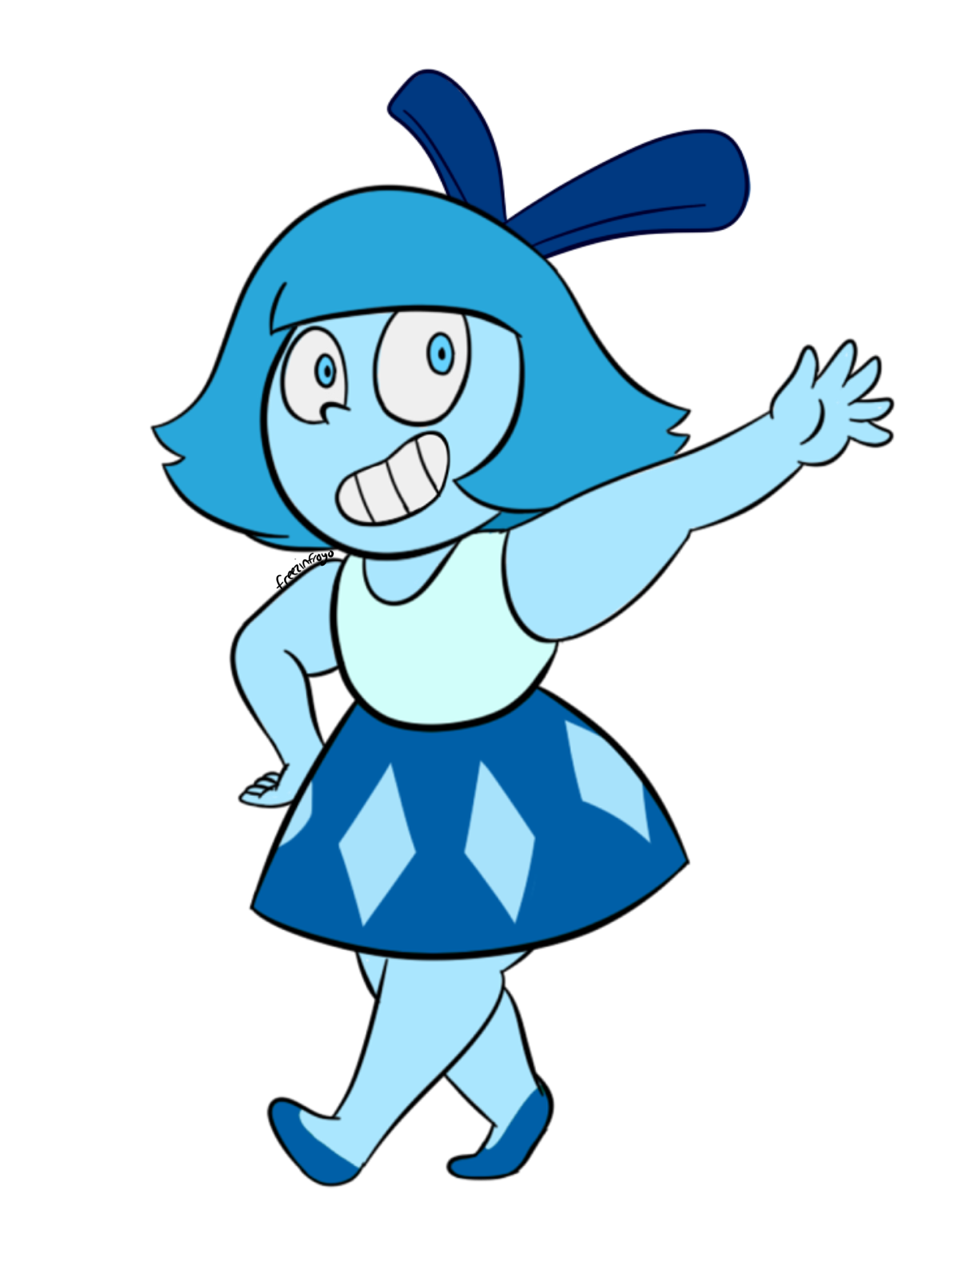 My interpretations of who those shadows were in the promo, aquamarine and topaz. And before anyone says anything, it was leaked to be aquamarine and topaz.